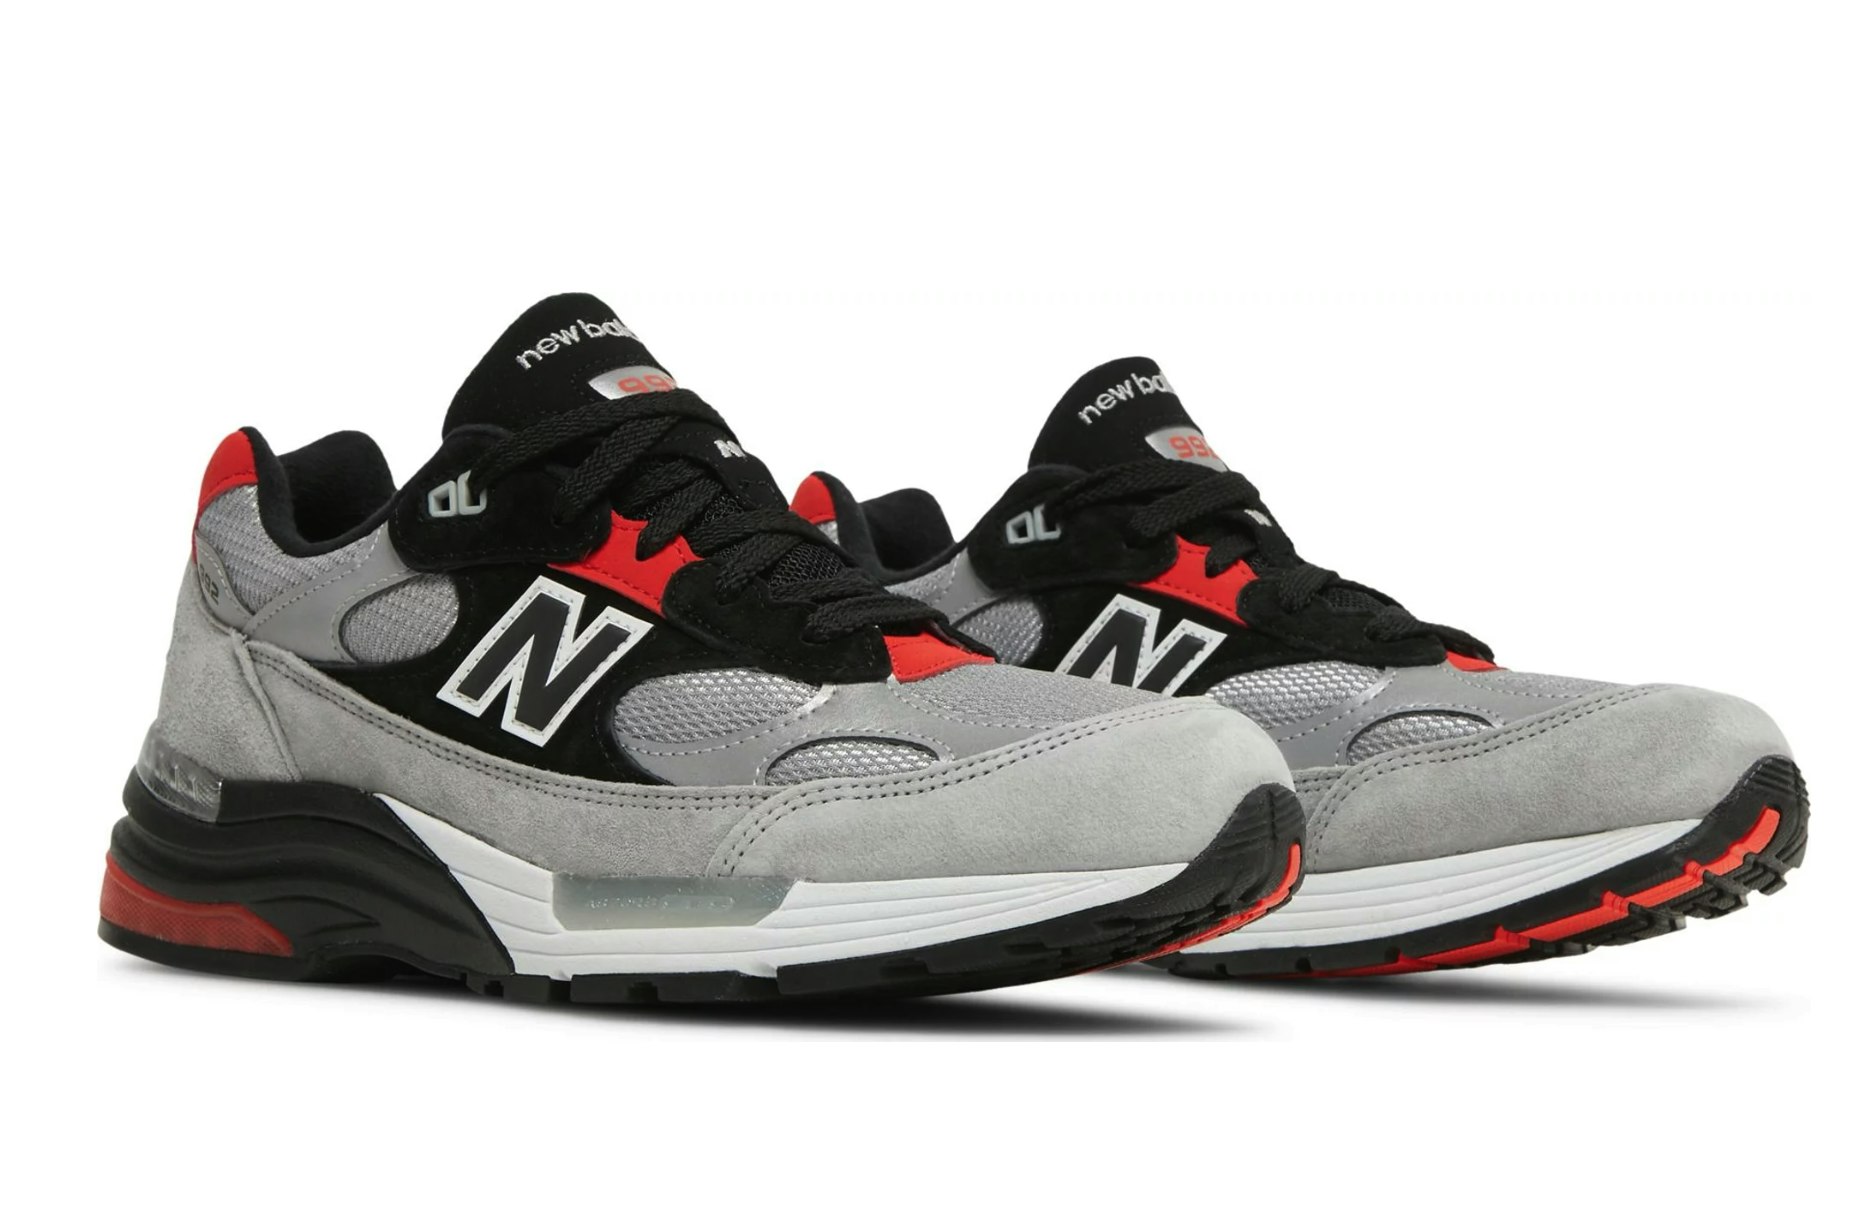 DTLR x New Balance 992 "Discover and Celebrate"